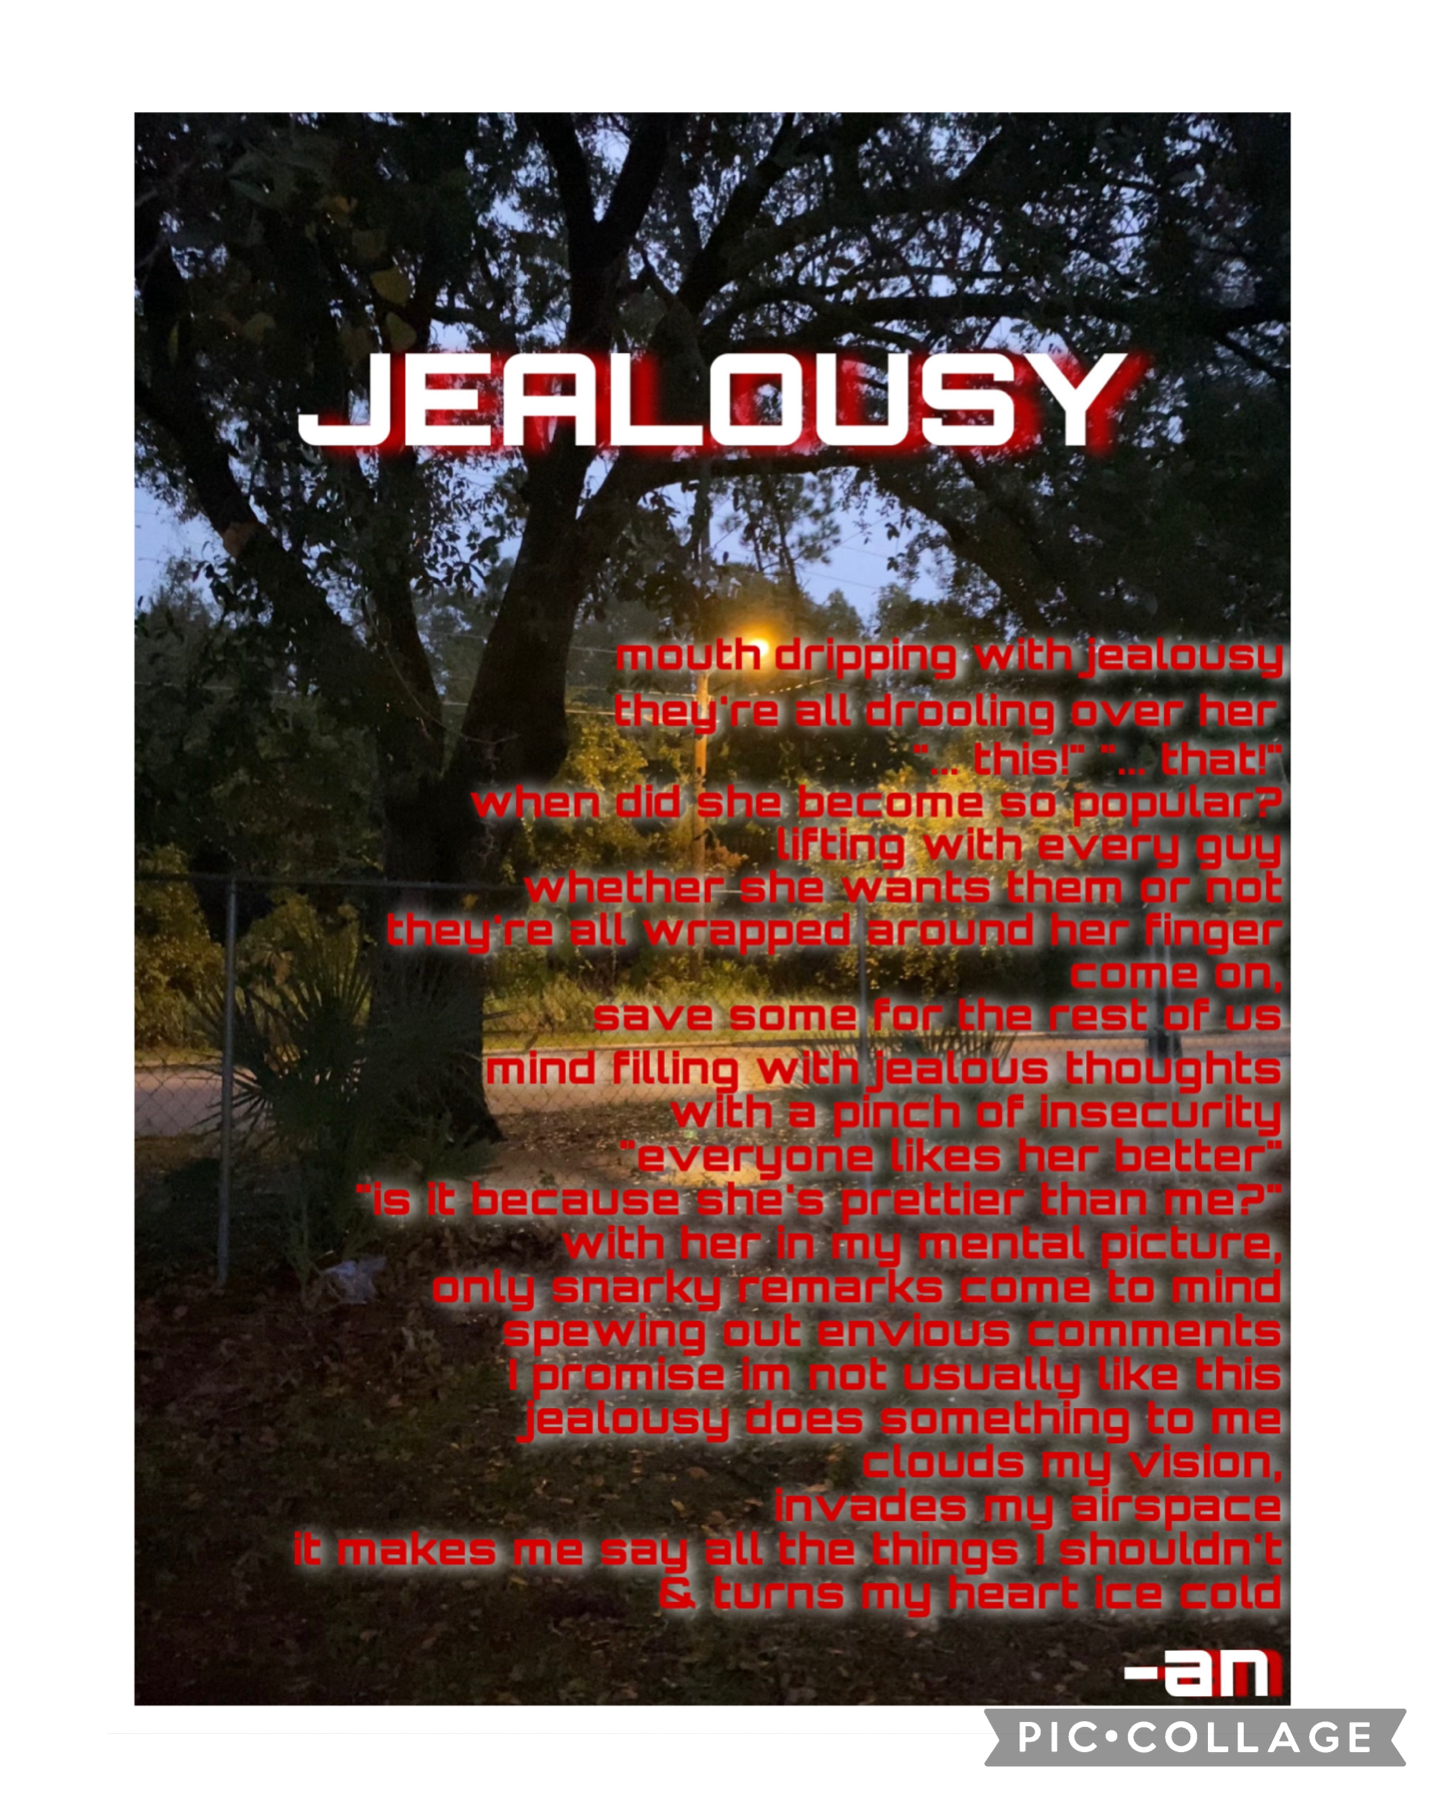 ‘jealousy’ (tappppp)
AHH 1ST POEM IM POSTINGG 
wrote this todayyy was a lil mad 😛
tell me what you thinkkkk